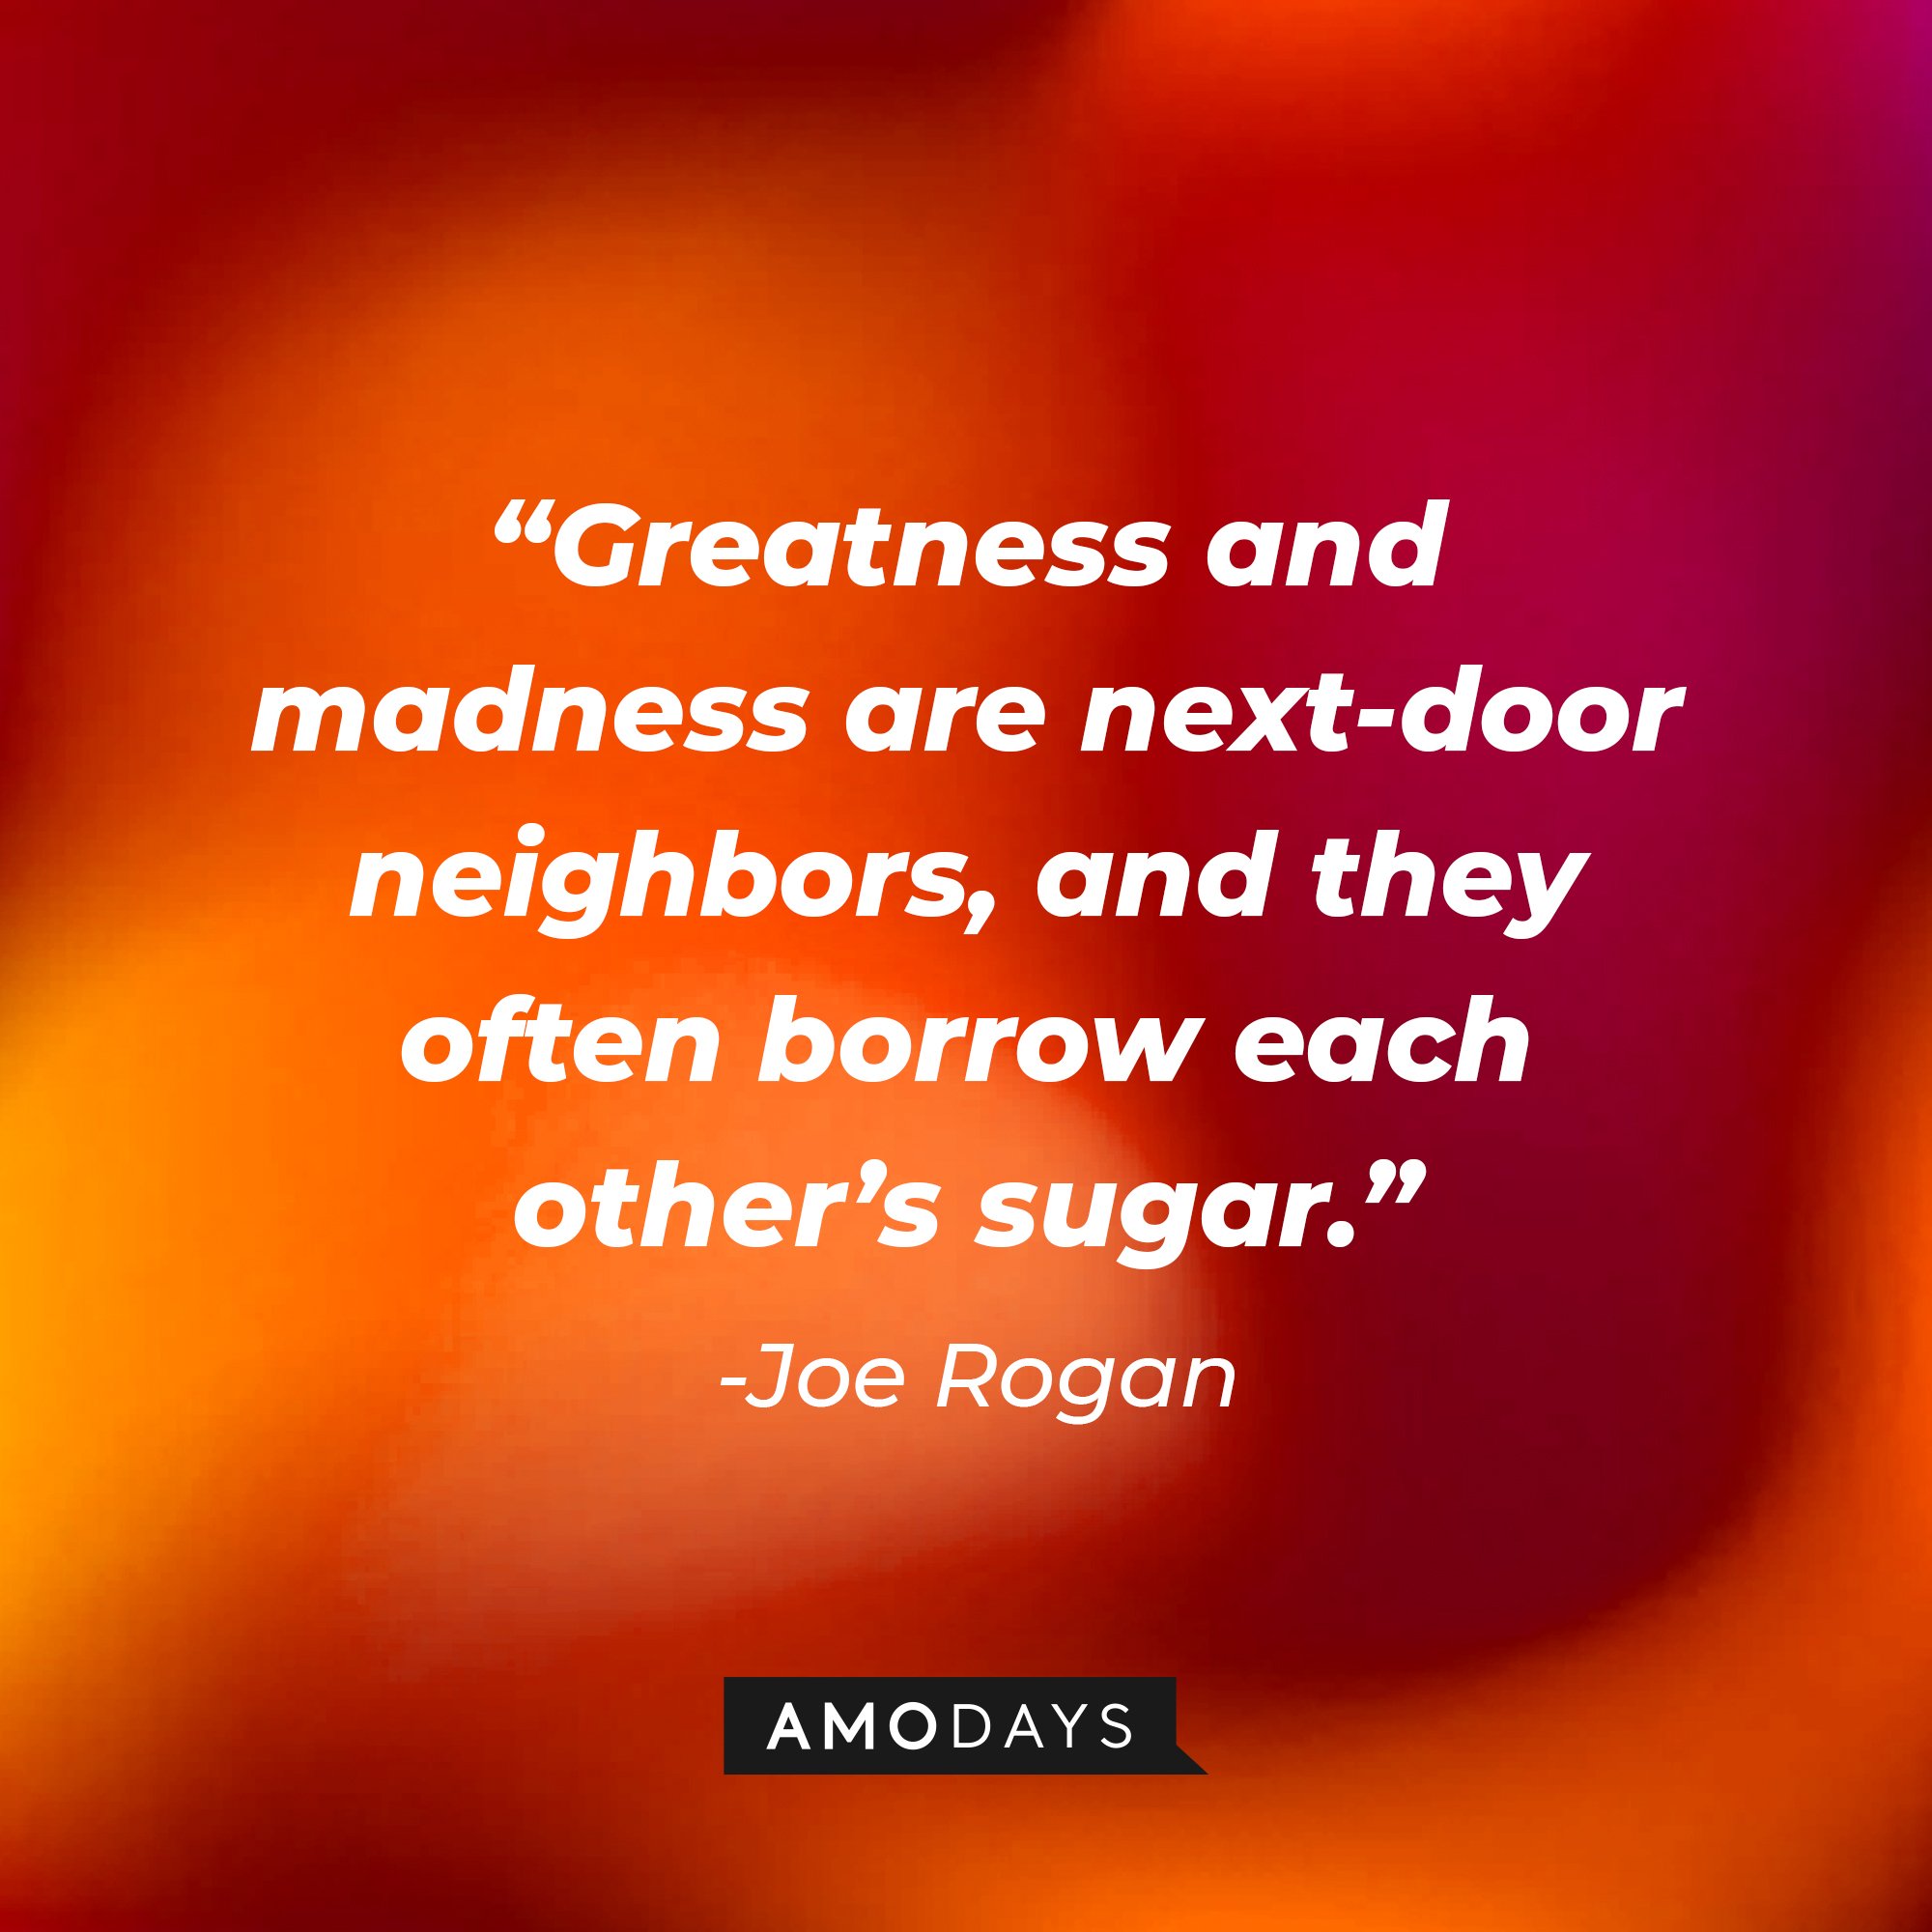 Joe Rogan's quote: "Greatness and madness are next-door neighbors, and they often borrow each other's sugar." | Image: AmoDays